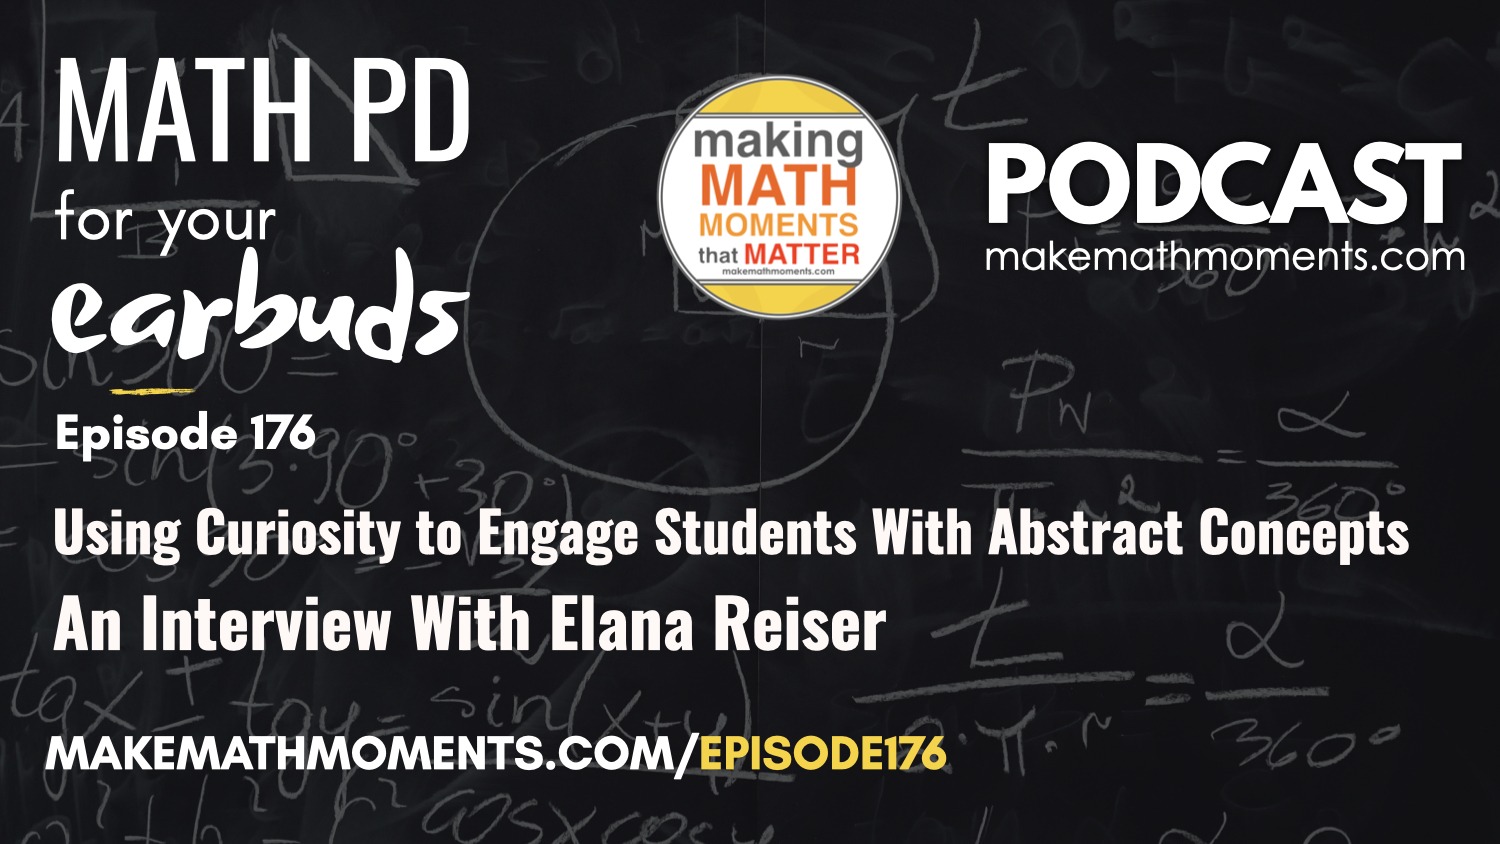 Episode 176: Using Curiosity to Engage Students With Abstract Concepts – An Interview With Elana Reiser